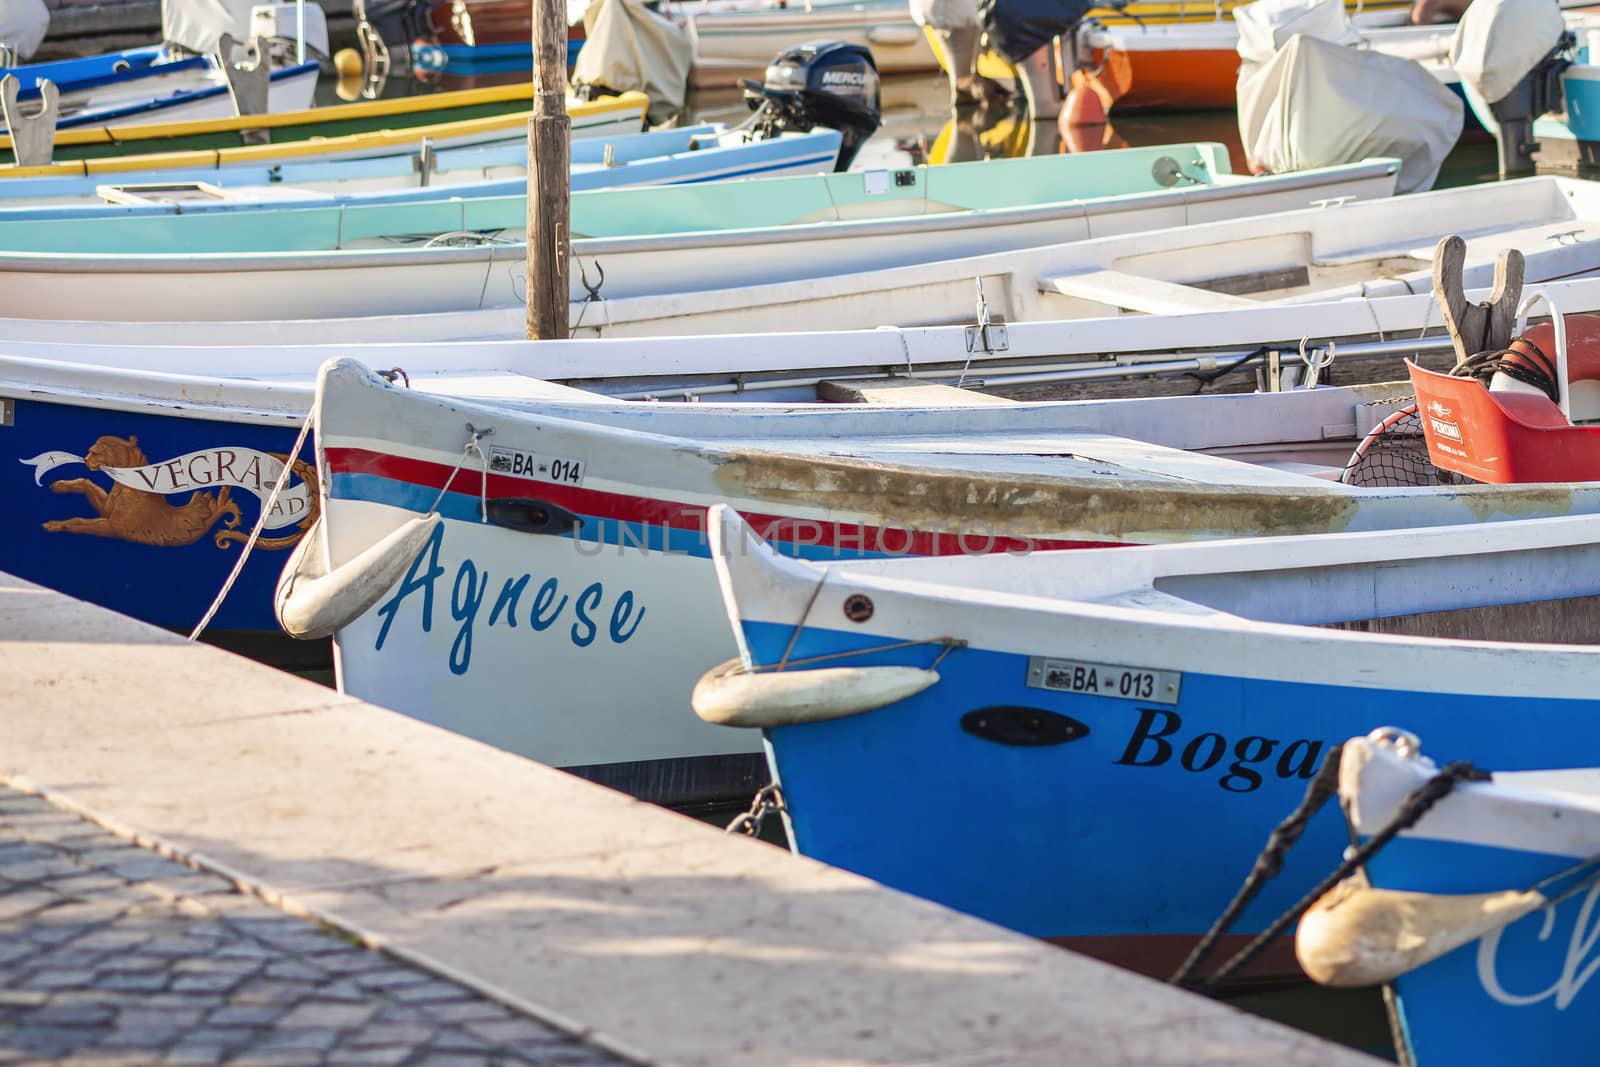 Colored boats moored on Bardolino port in Italy 4 by pippocarlot